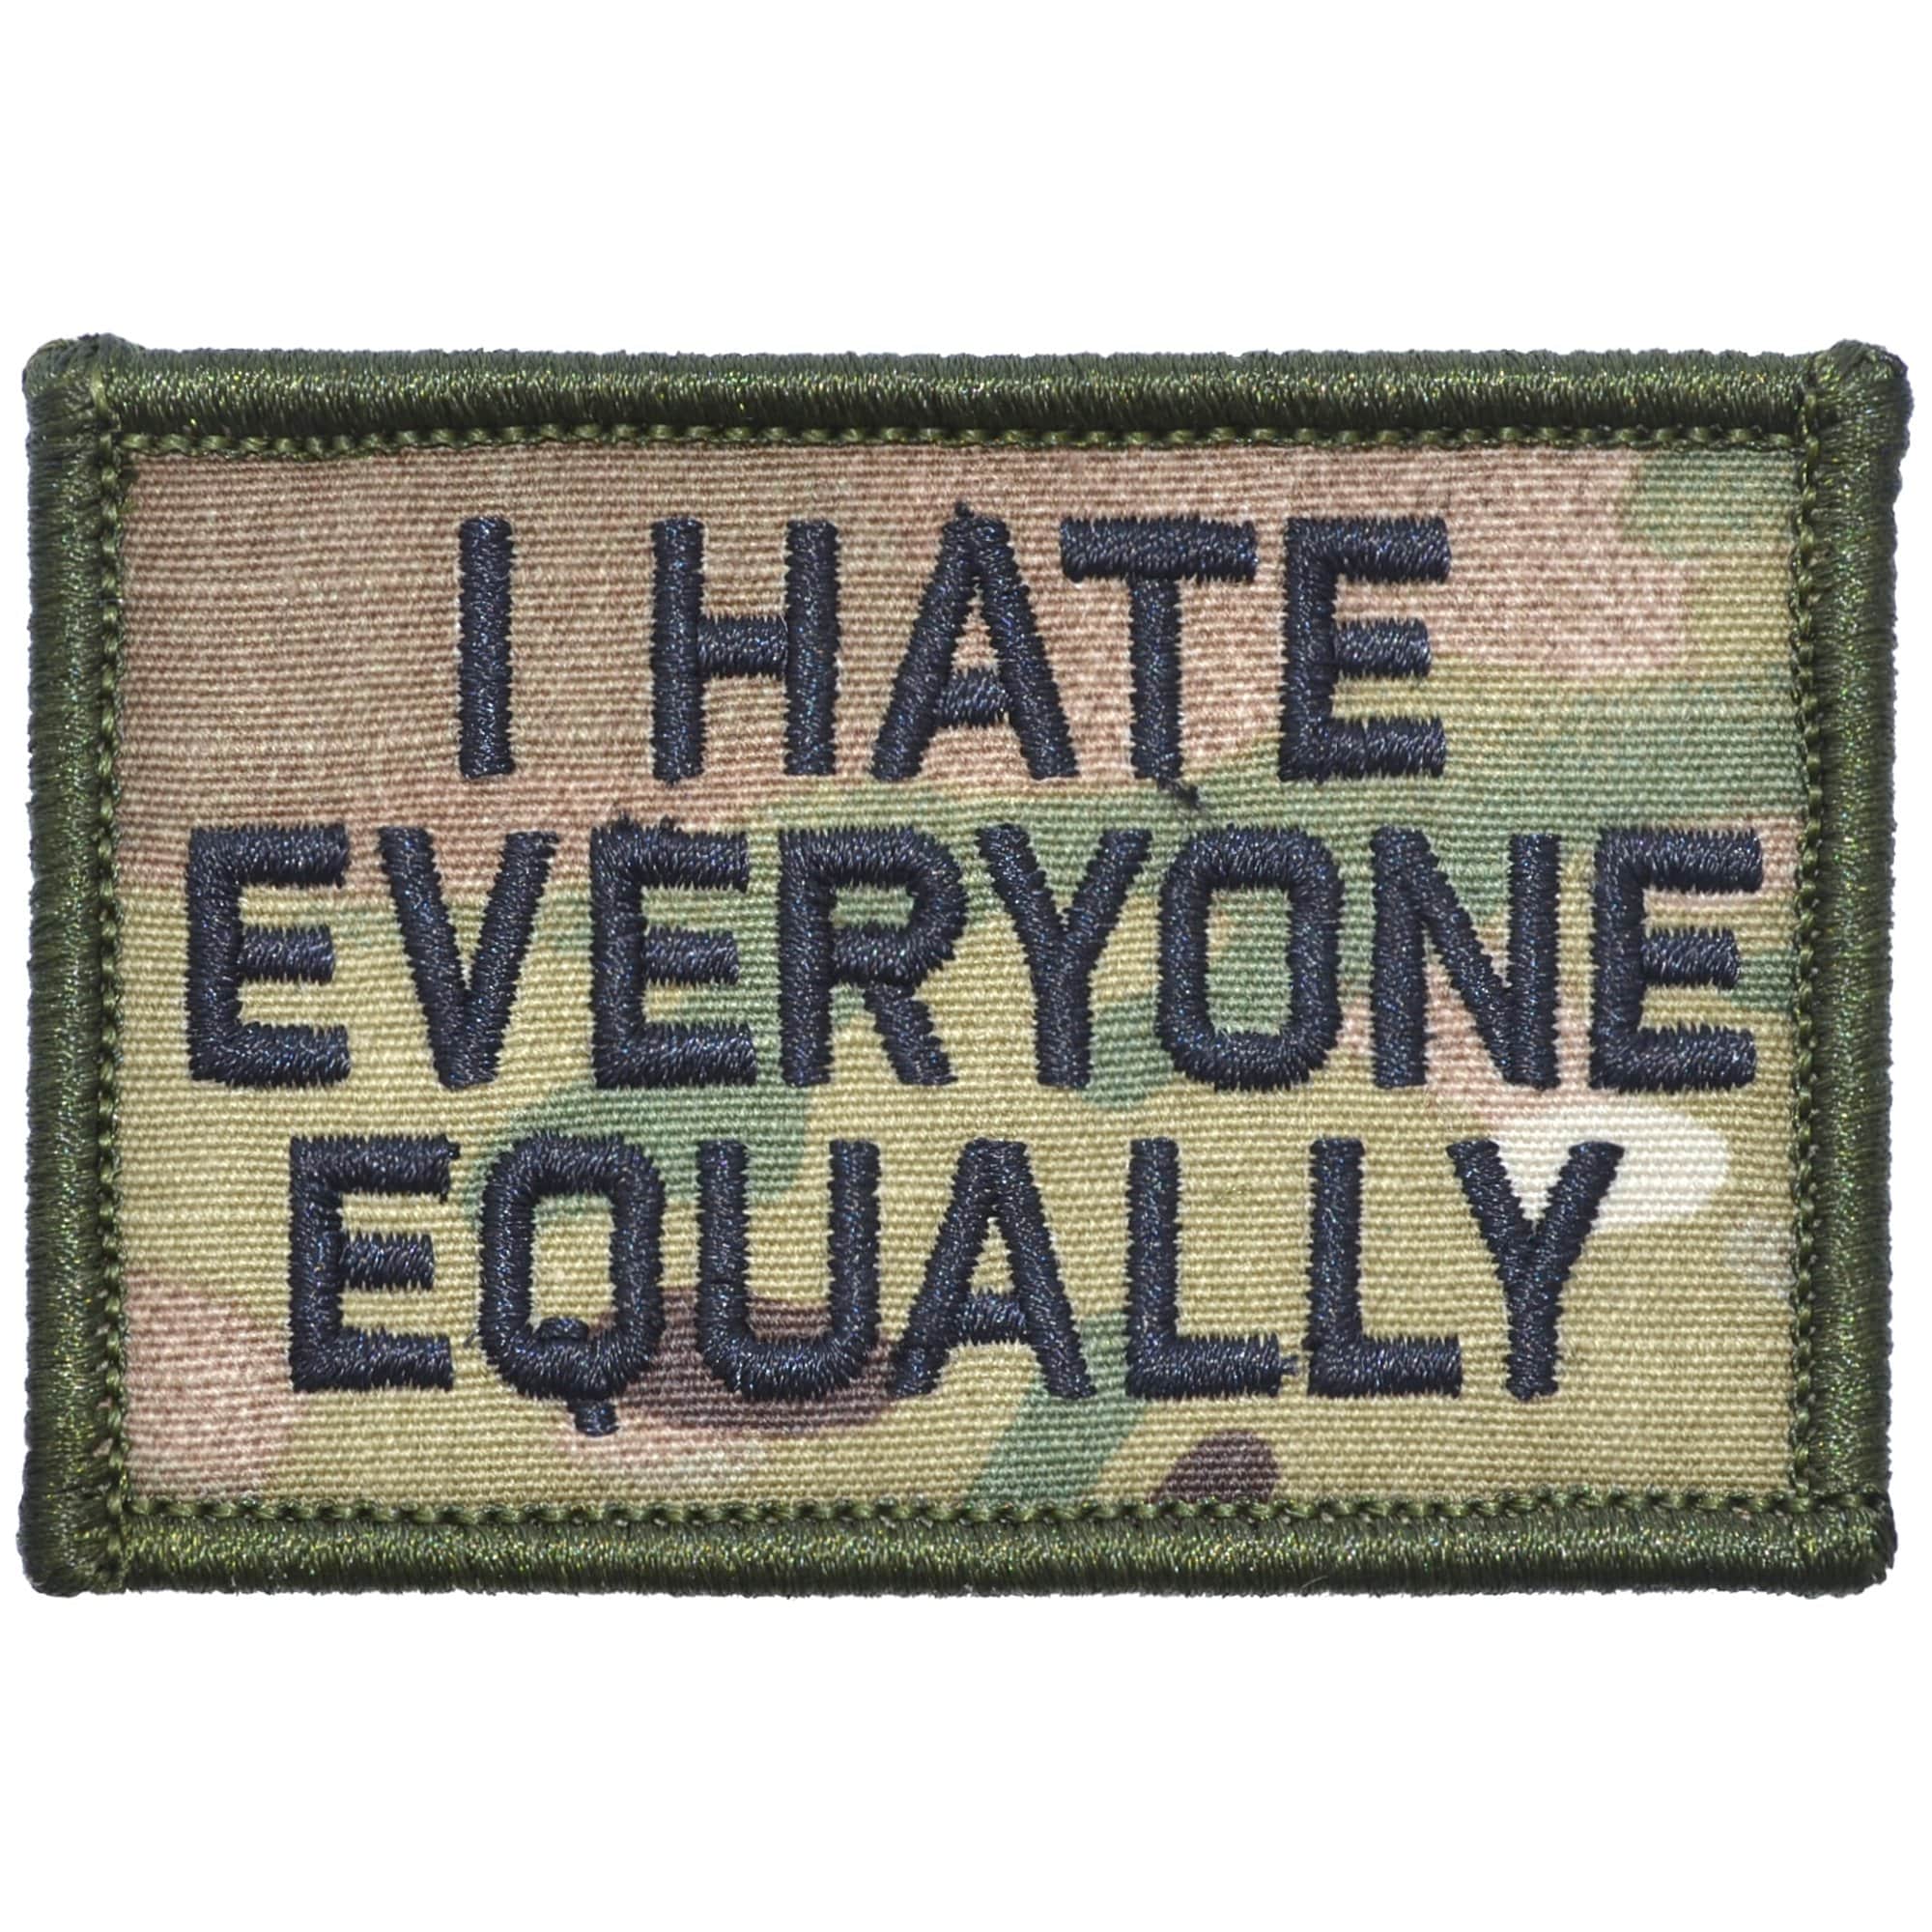 Tactical Gear Junkie Patches MultiCam I Hate Everyone Equally - 2x3 Patch